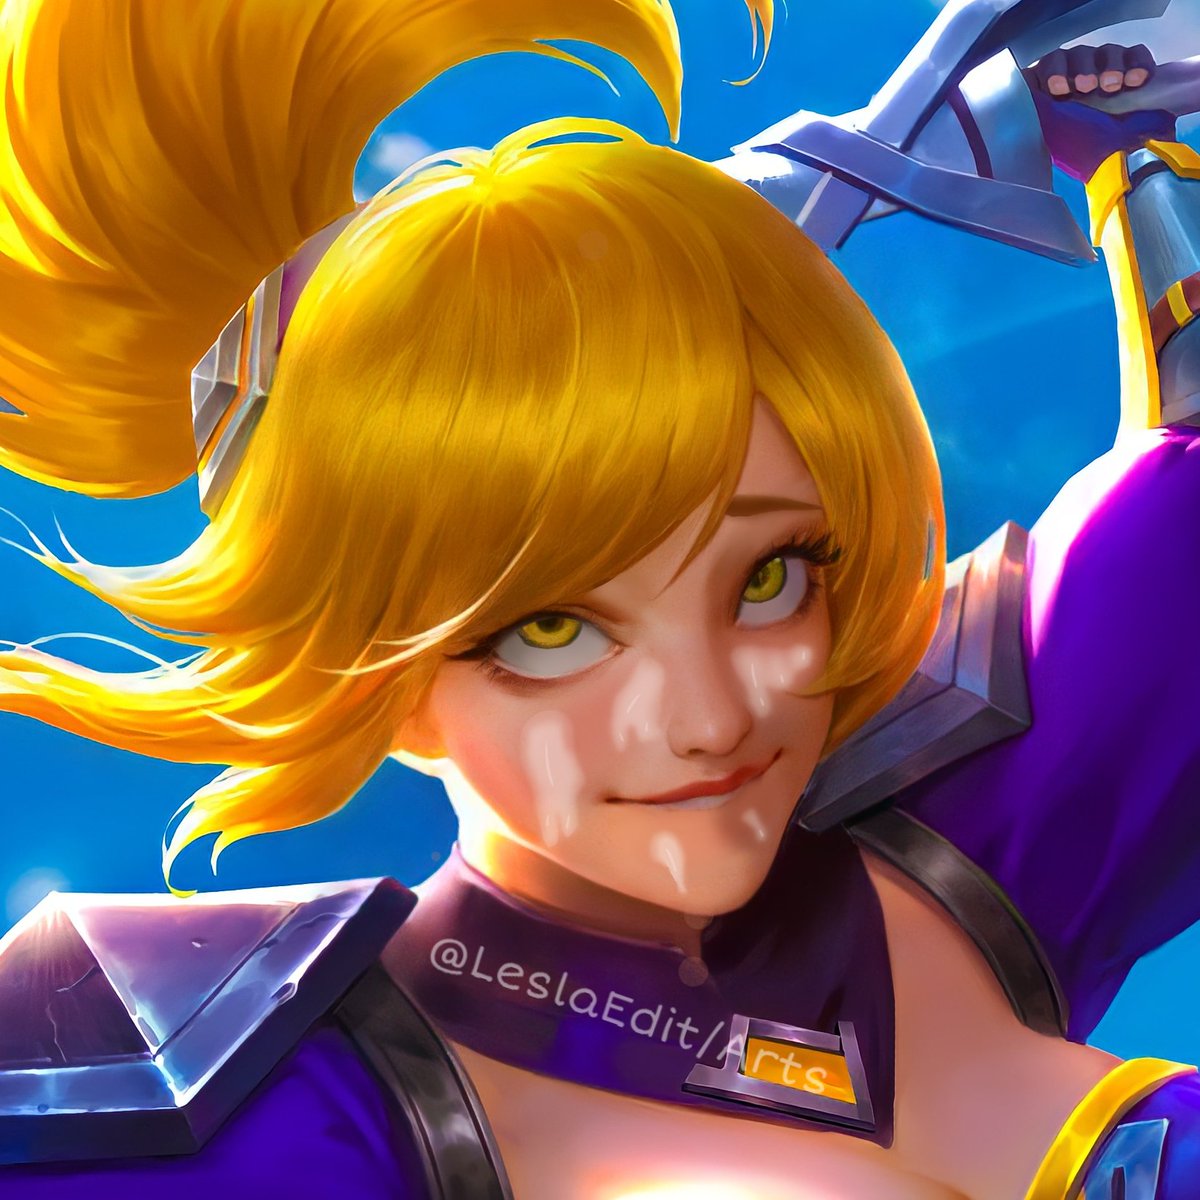 Lesla On Twitter Mobile Legends Fanny Ahegao I Know Someone Already Created A Fanny Ahegao But I Just Wanted To Make My Own Version Mobilelegendsbangbang Ahegao Https Tco TIFIQxCG9t